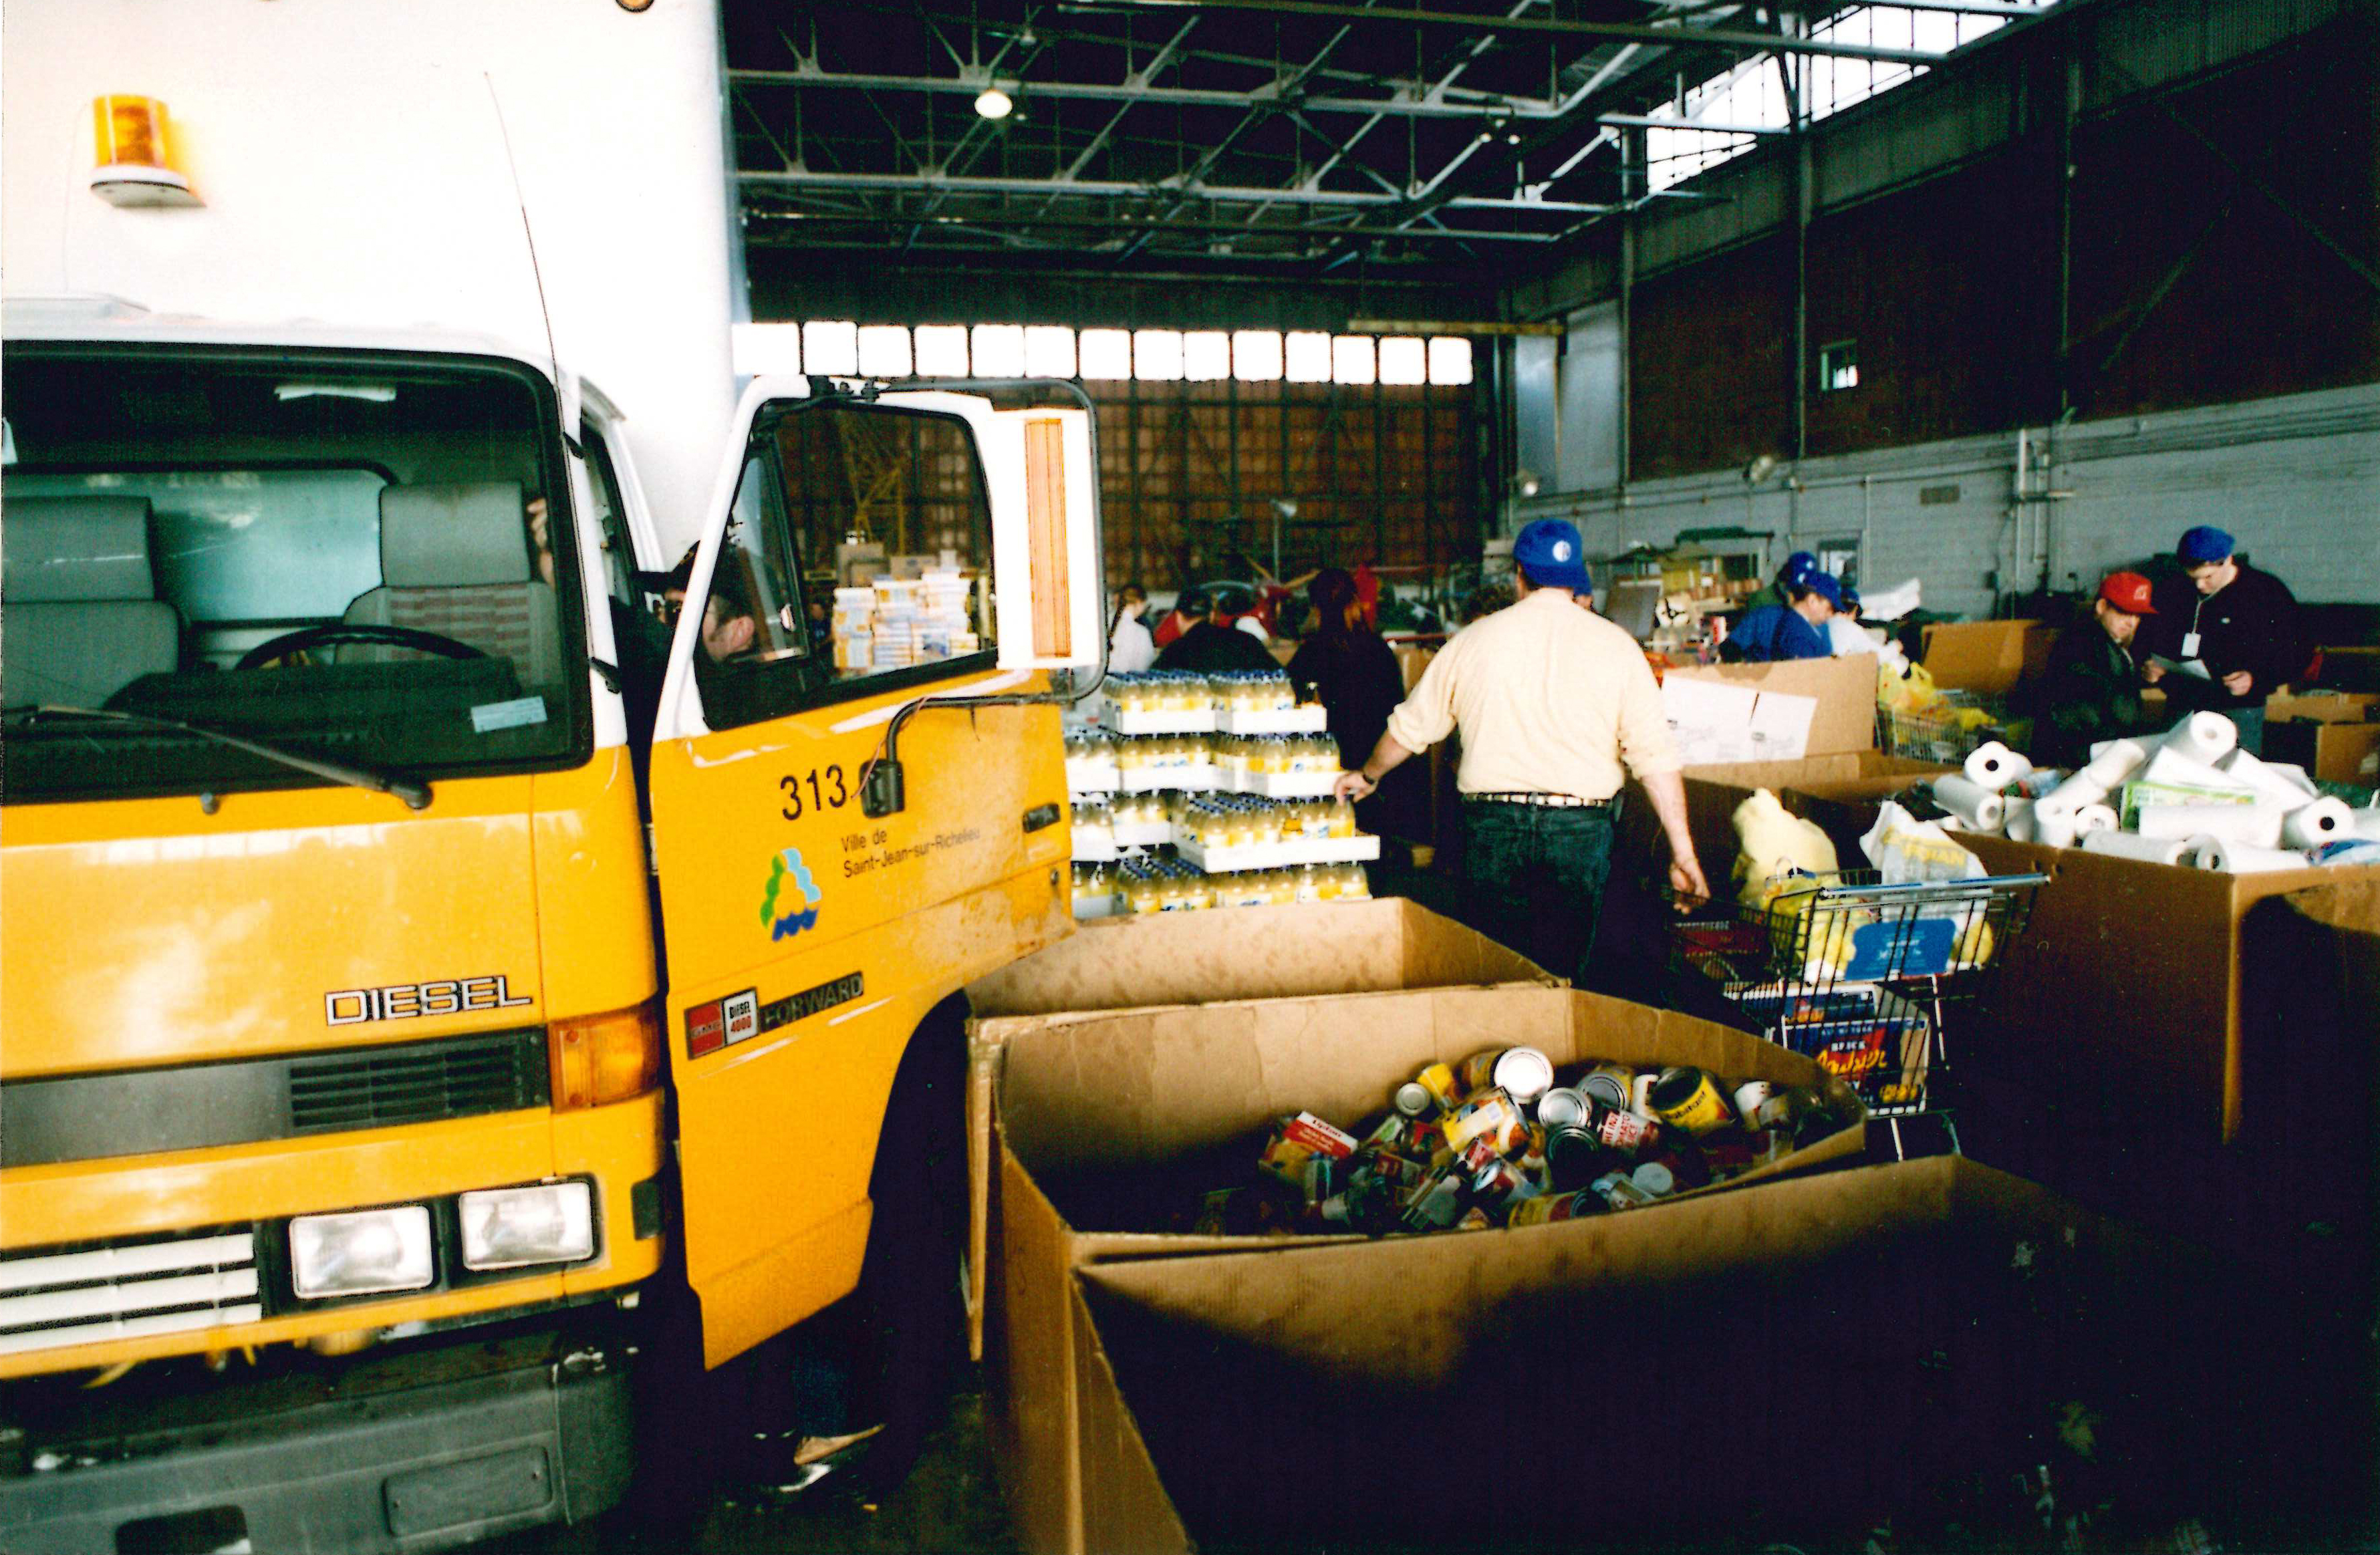 The Hanger-4 of the military base became a distribution centre for needed food and clothing.